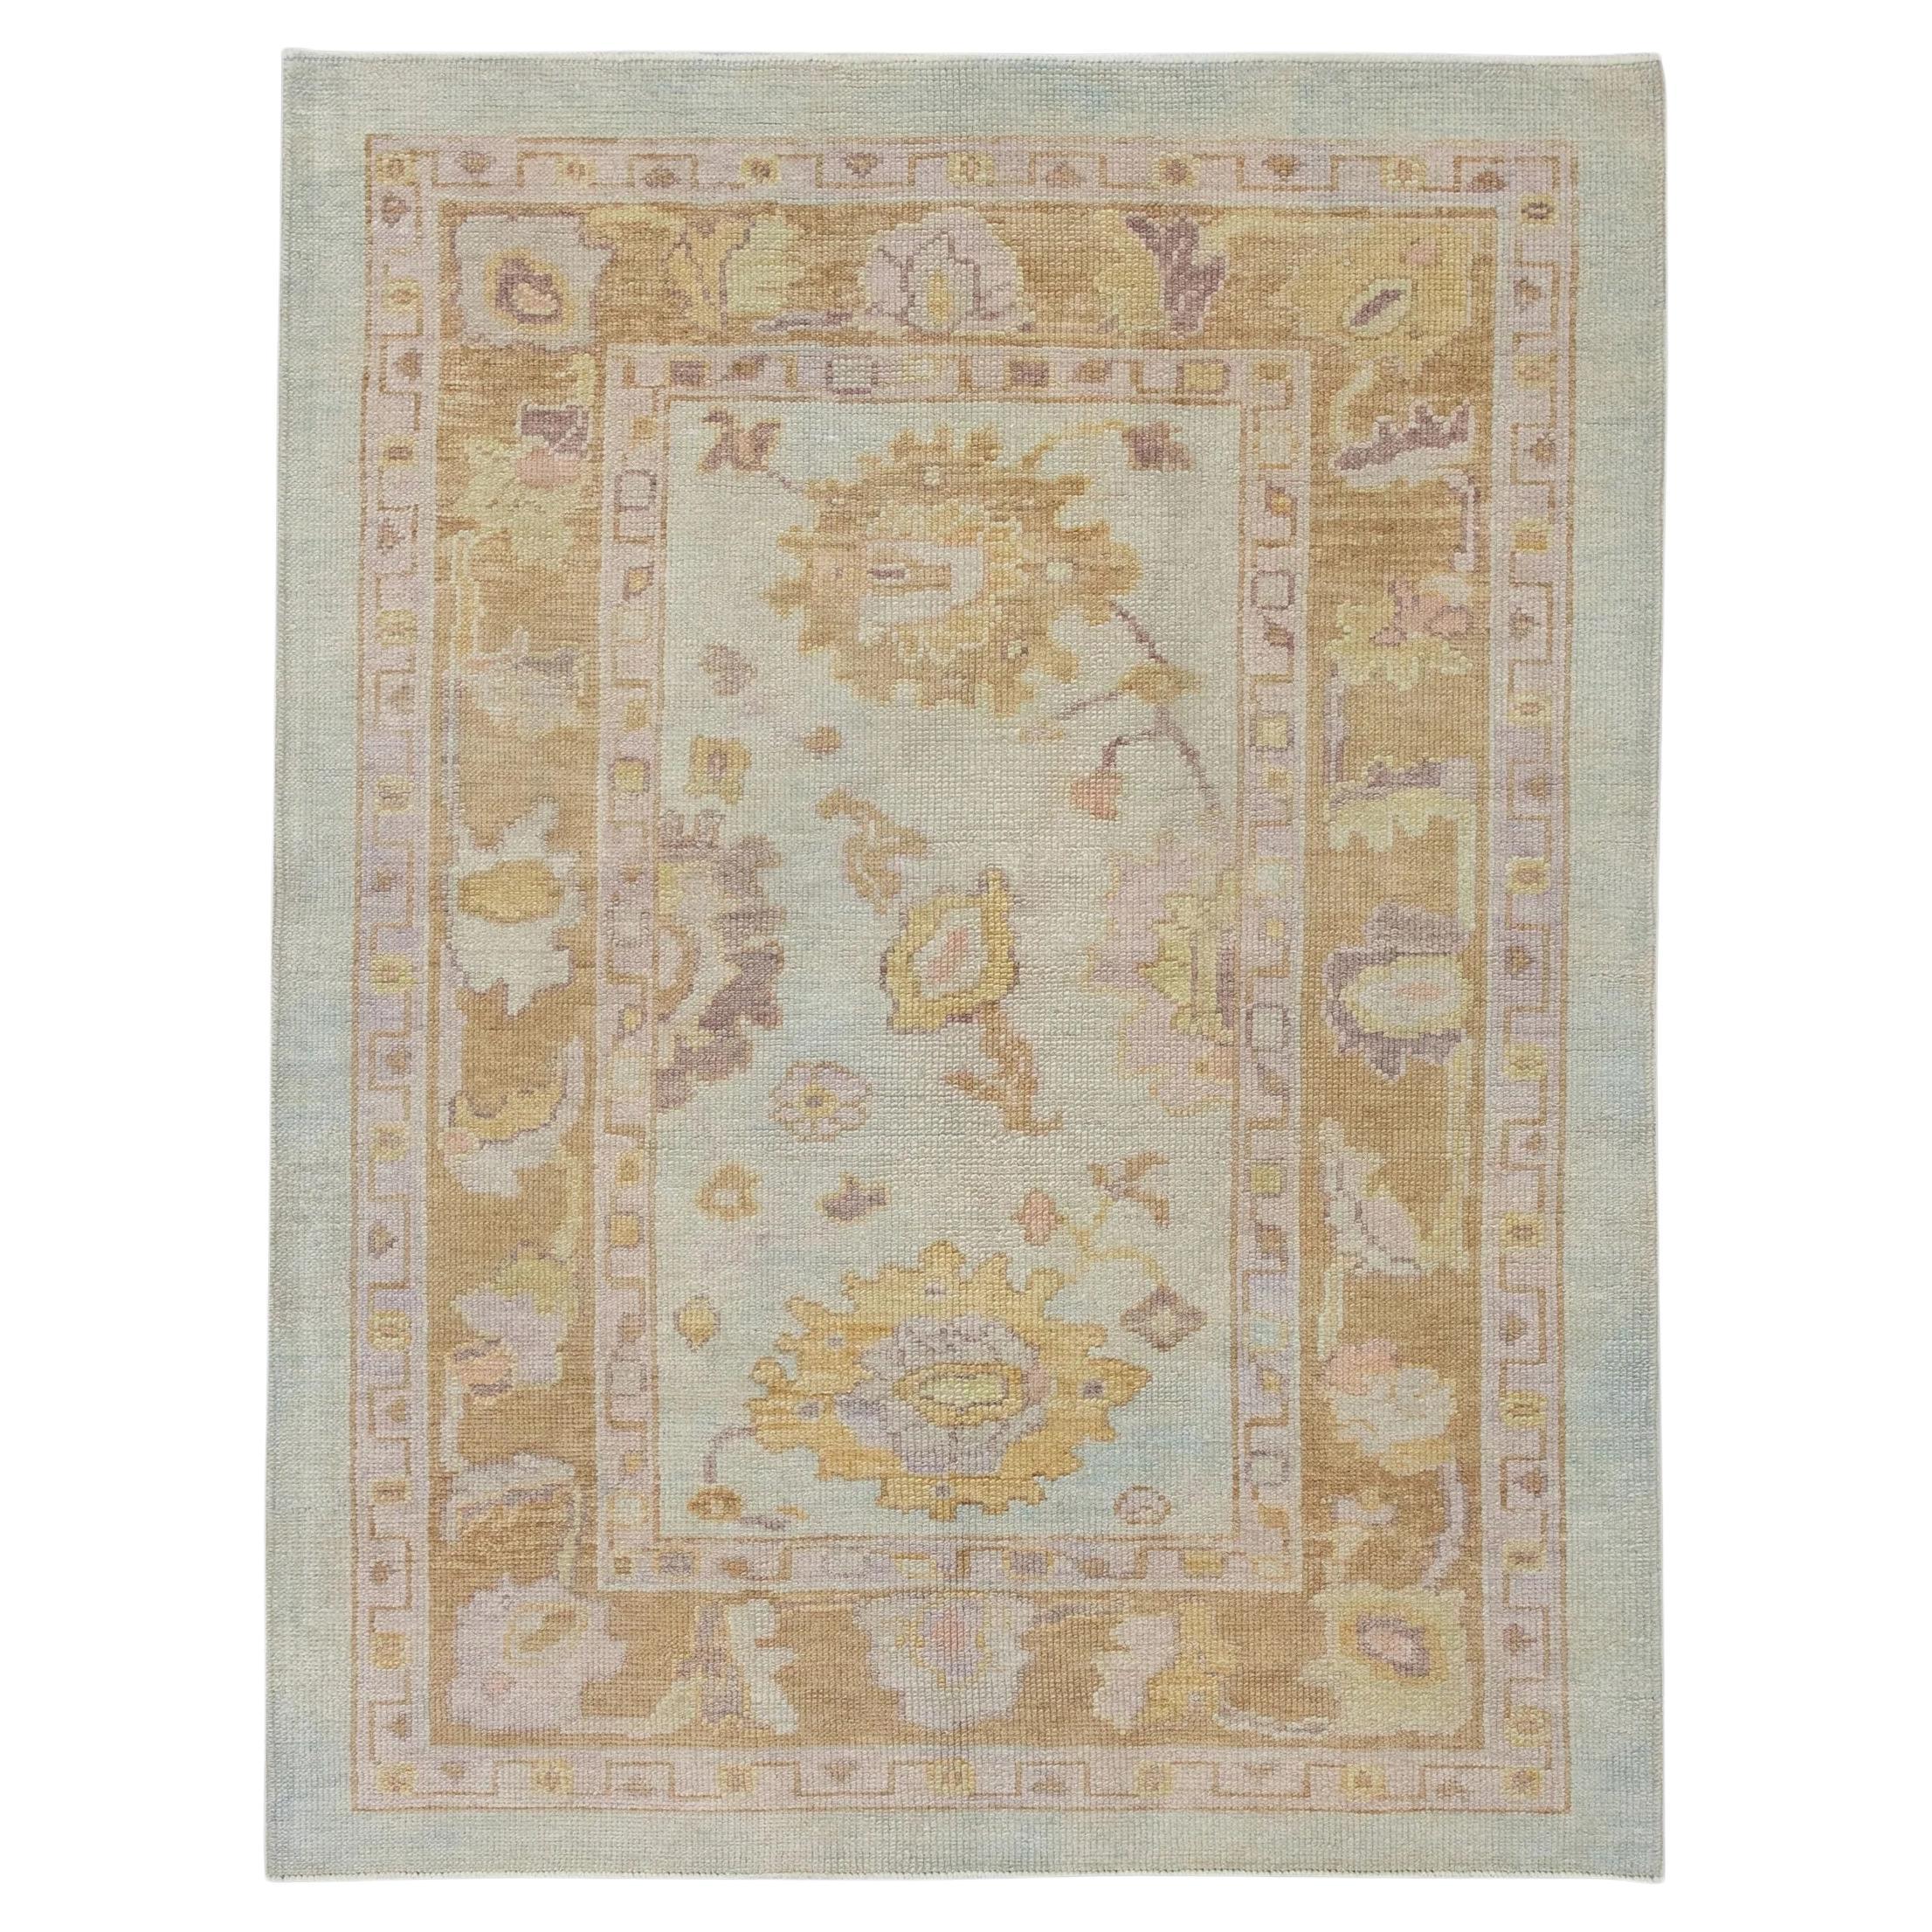 Baby Blue Floral Handwoven Wool Turkish Oushak Rug 4'1" x 5'3" For Sale